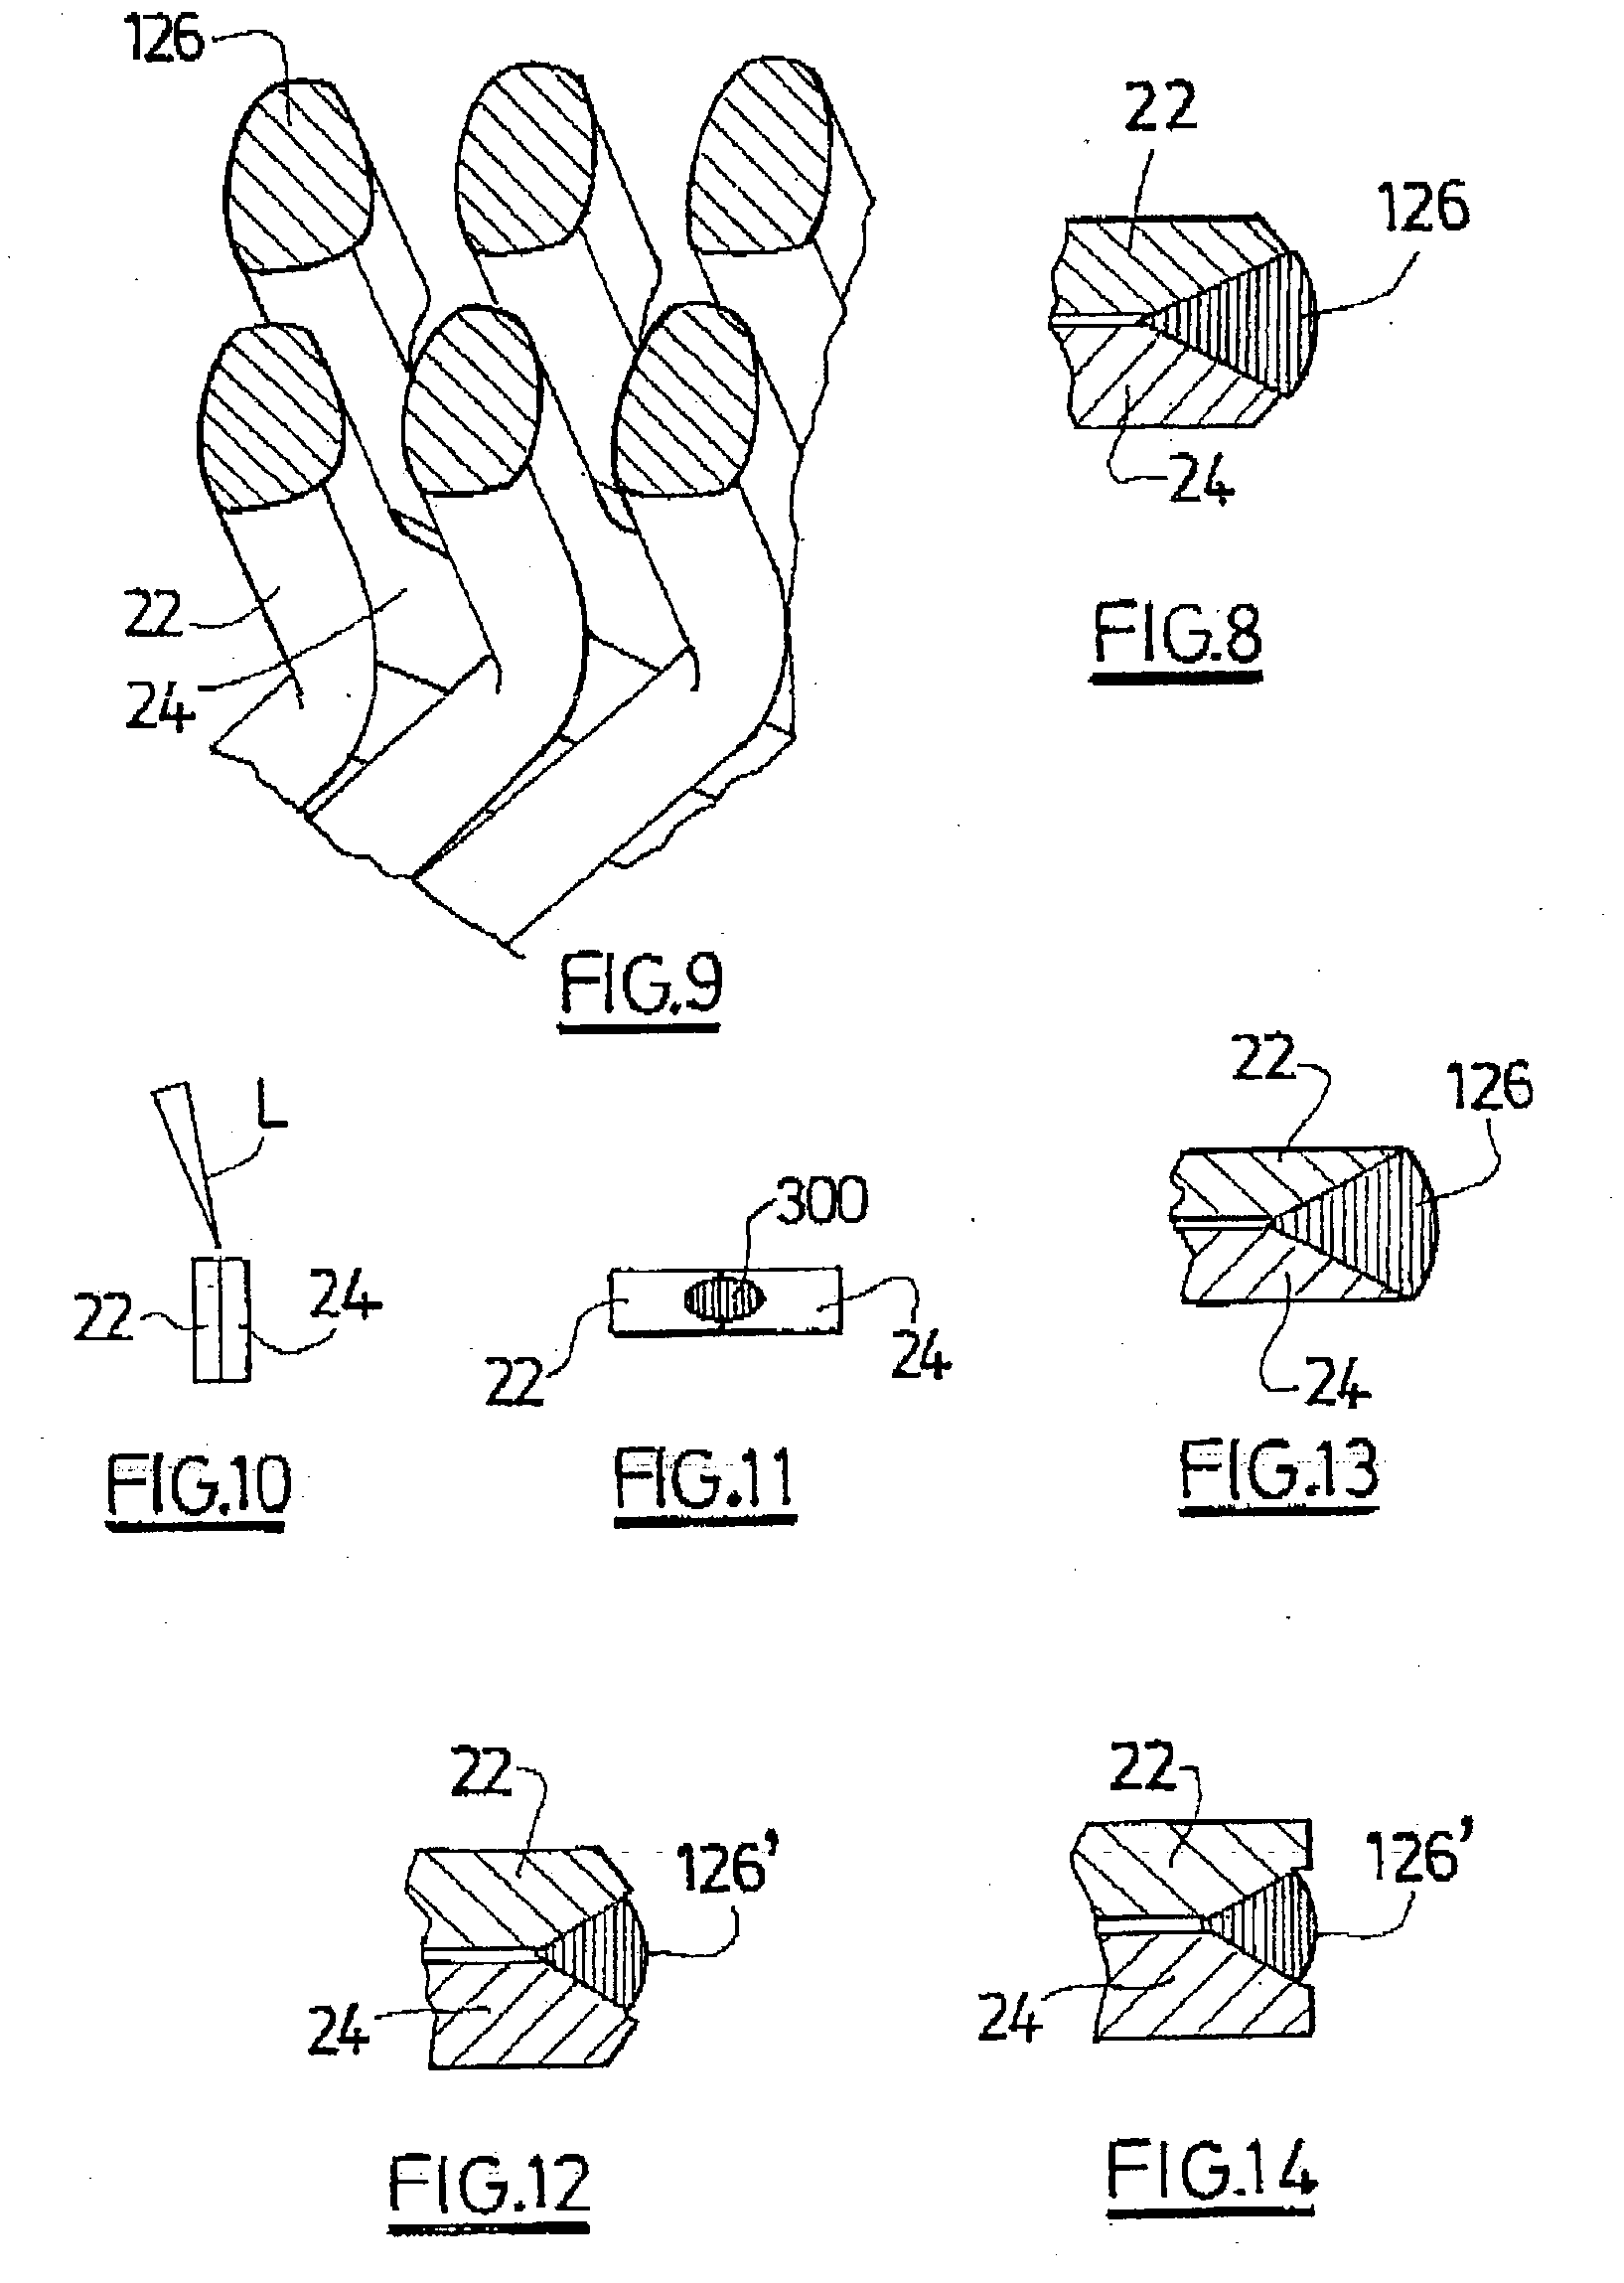 Method for assembling conductive segments of a rotor winding or stator winding in a rotary electric machine